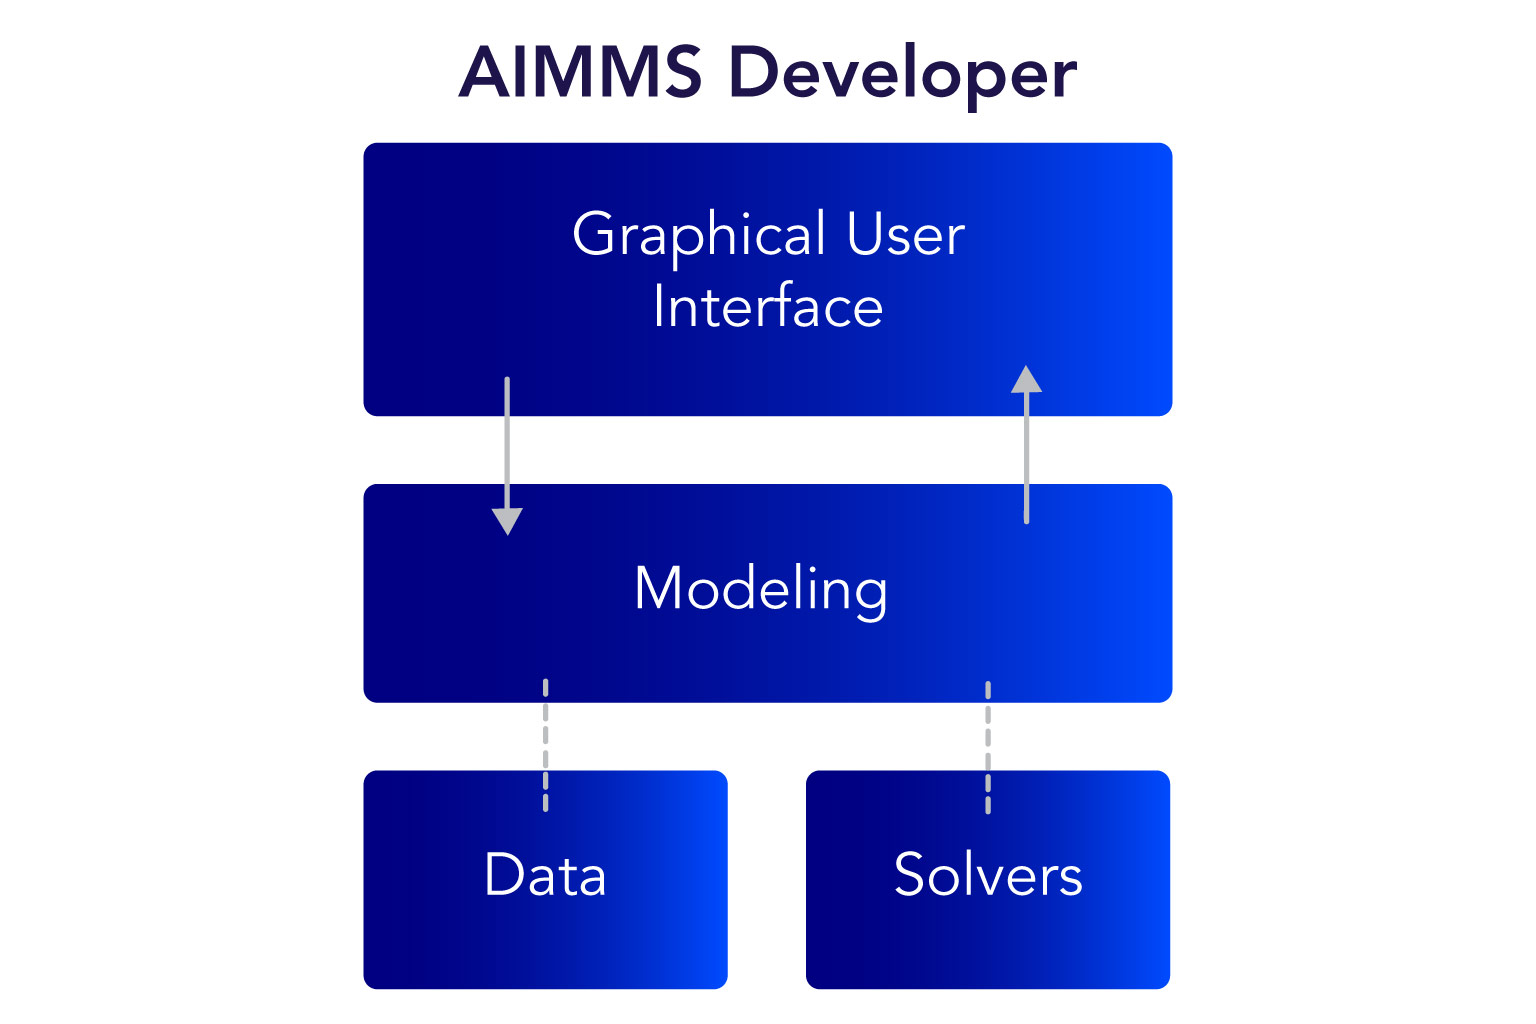 ../_images/AIMMS-Developer-graphic1-1.jpg